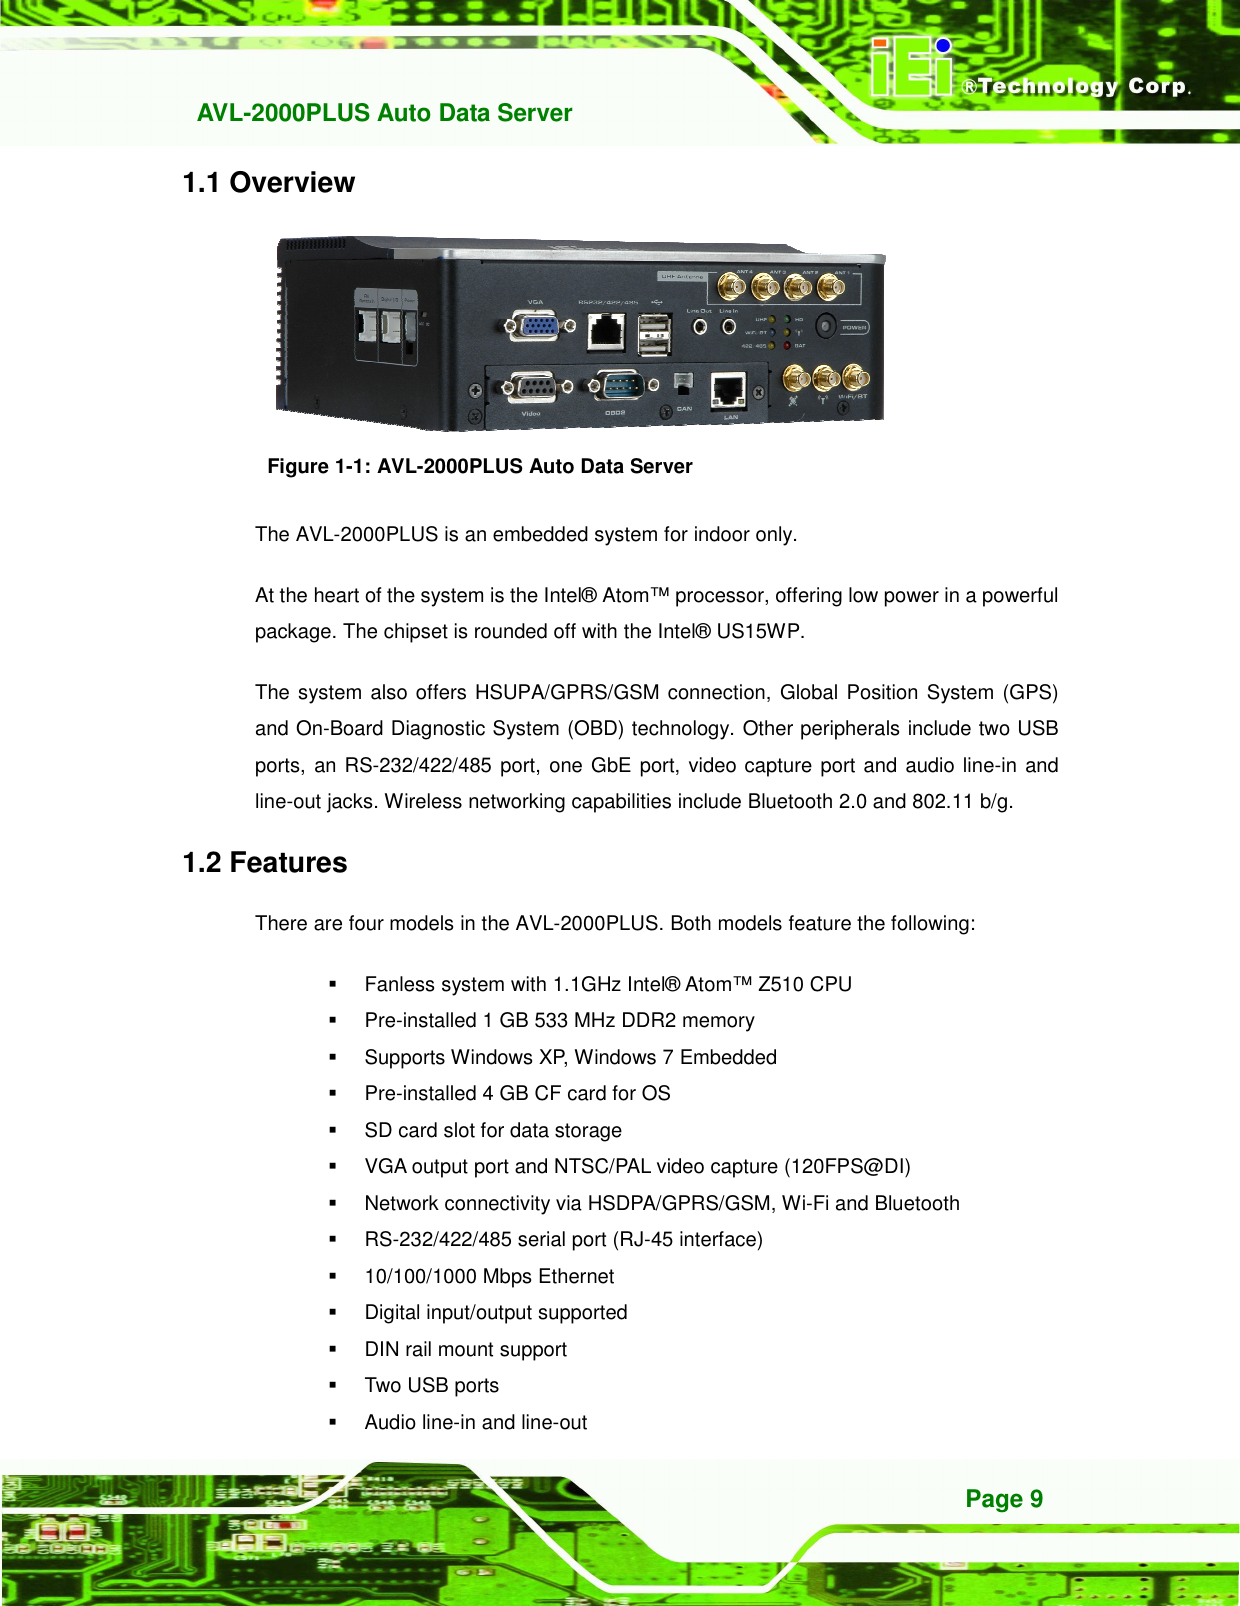   AVL-2000PLUS Auto Data Server Page 9 1.1 Overview  Figure 1-1: AVL-2000PLUS Auto Data Server The AVL-2000PLUS is an embedded system for indoor only.   At the heart of the system is the Intel® Atom™ processor, offering low power in a powerful package. The chipset is rounded off with the Intel® US15WP. The system also offers HSUPA/GPRS/GSM connection, Global Position System (GPS) and On-Board Diagnostic System (OBD) technology. Other peripherals include two USB ports,  an RS-232/422/485 port, one GbE port, video capture port and audio line-in and line-out jacks. Wireless networking capabilities include Bluetooth 2.0 and 802.11 b/g. 1.2 Features There are four models in the AVL-2000PLUS. Both models feature the following:   Fanless system with 1.1GHz Intel® Atom™ Z510 CPU   Pre-installed 1 GB 533 MHz DDR2 memory   Supports Windows XP, Windows 7 Embedded   Pre-installed 4 GB CF card for OS     SD card slot for data storage   VGA output port and NTSC/PAL video capture (120FPS@DI)   Network connectivity via HSDPA/GPRS/GSM, Wi-Fi and Bluetooth     RS-232/422/485 serial port (RJ-45 interface)   10/100/1000 Mbps Ethernet   Digital input/output supported   DIN rail mount support   Two USB ports   Audio line-in and line-out 